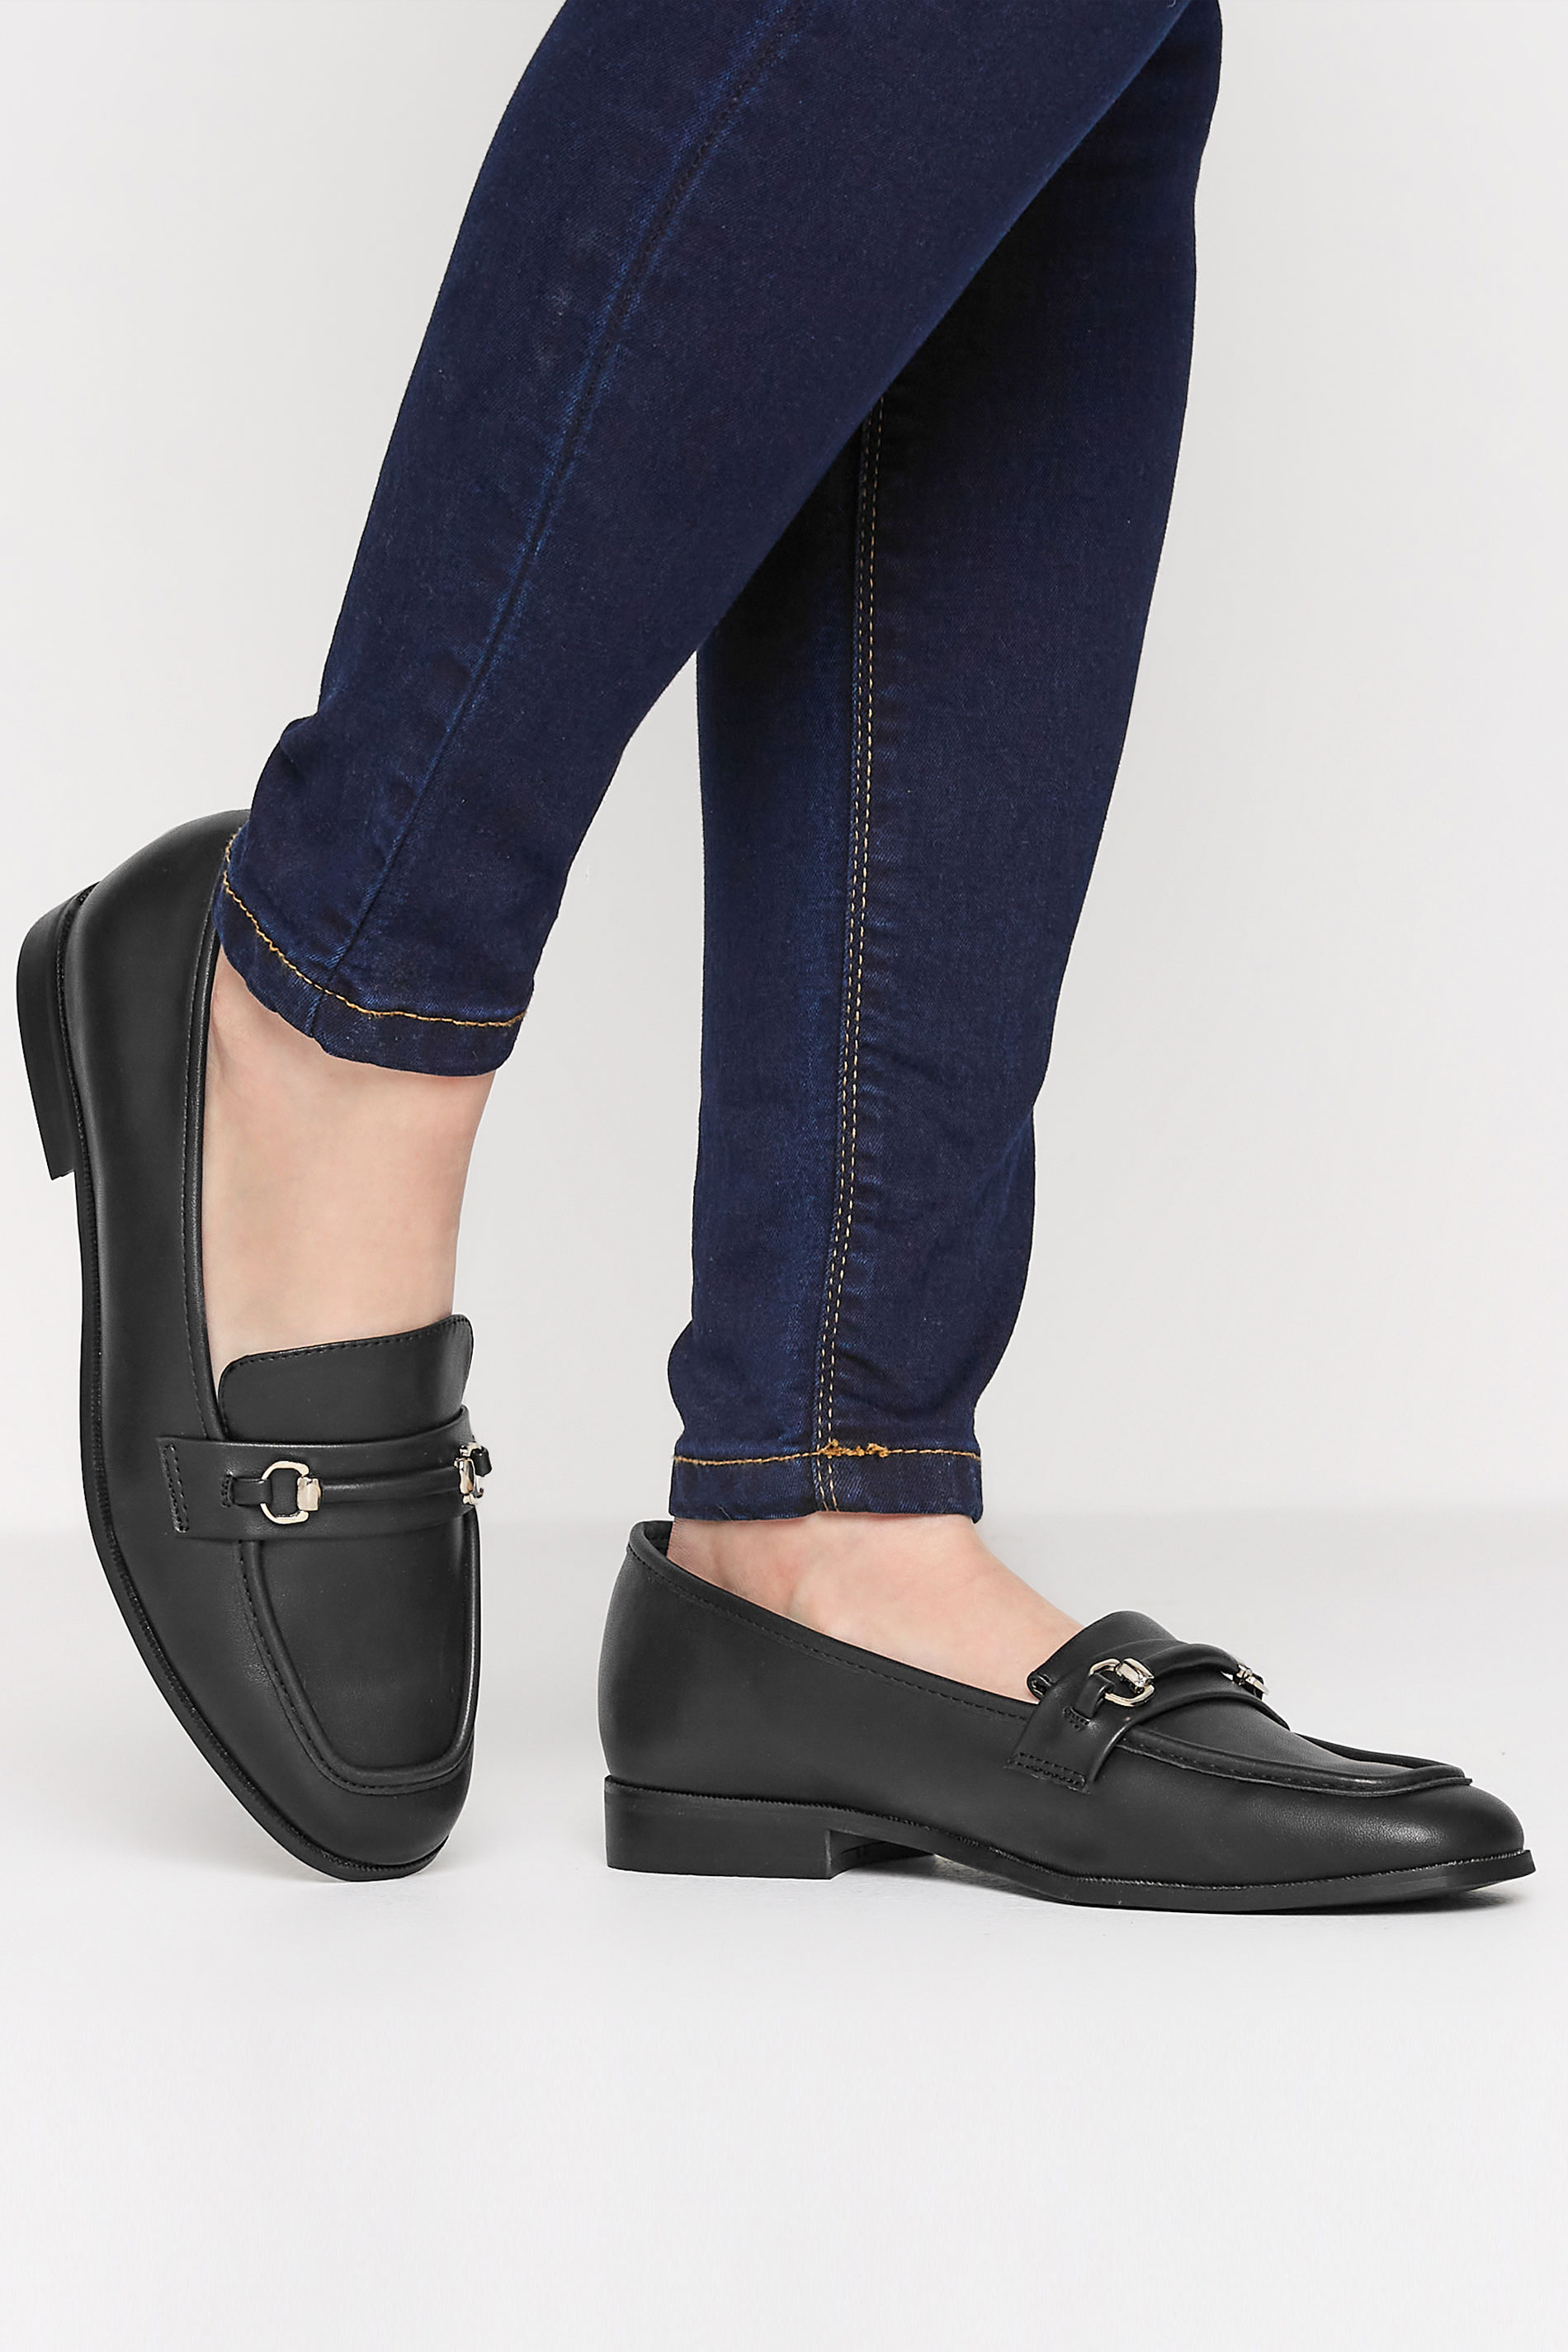 LTS Black Saddle Loafers In Standard Fit | Long Tall Sally